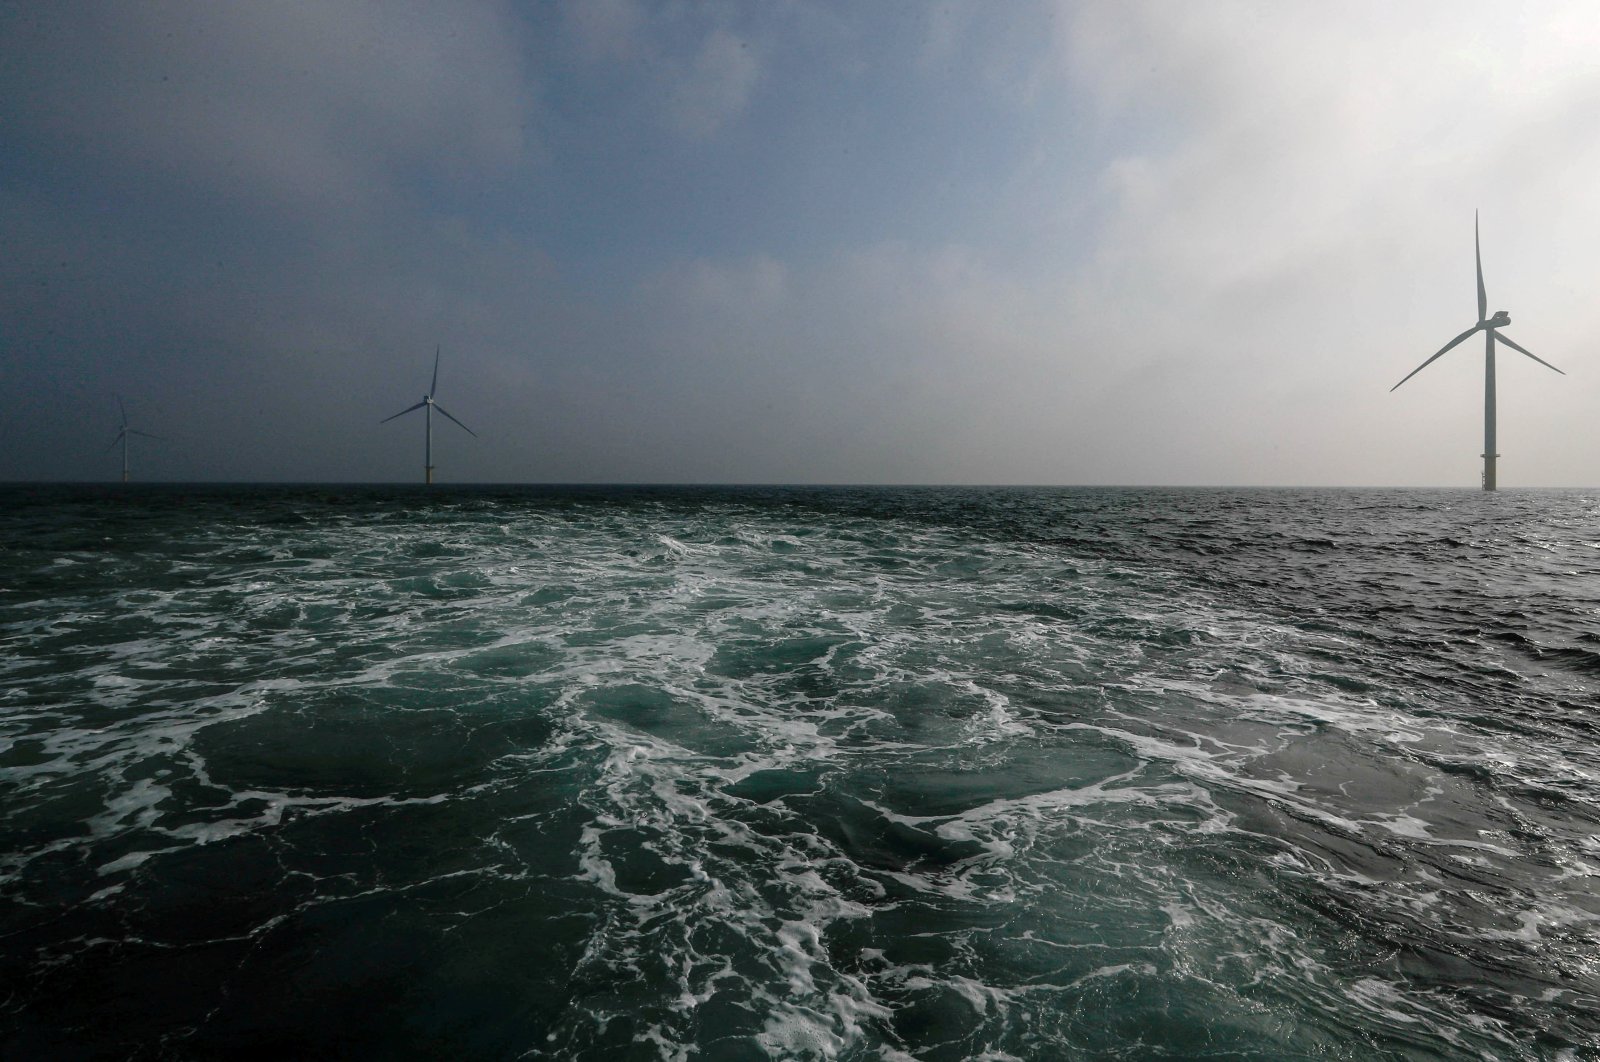 Power-generating windmill turbines are seen at the Eneco Luchterduinen offshore wind farm near Amsterdam, the Netherlands, Sept. 26, 2017. (Reuters Photo)